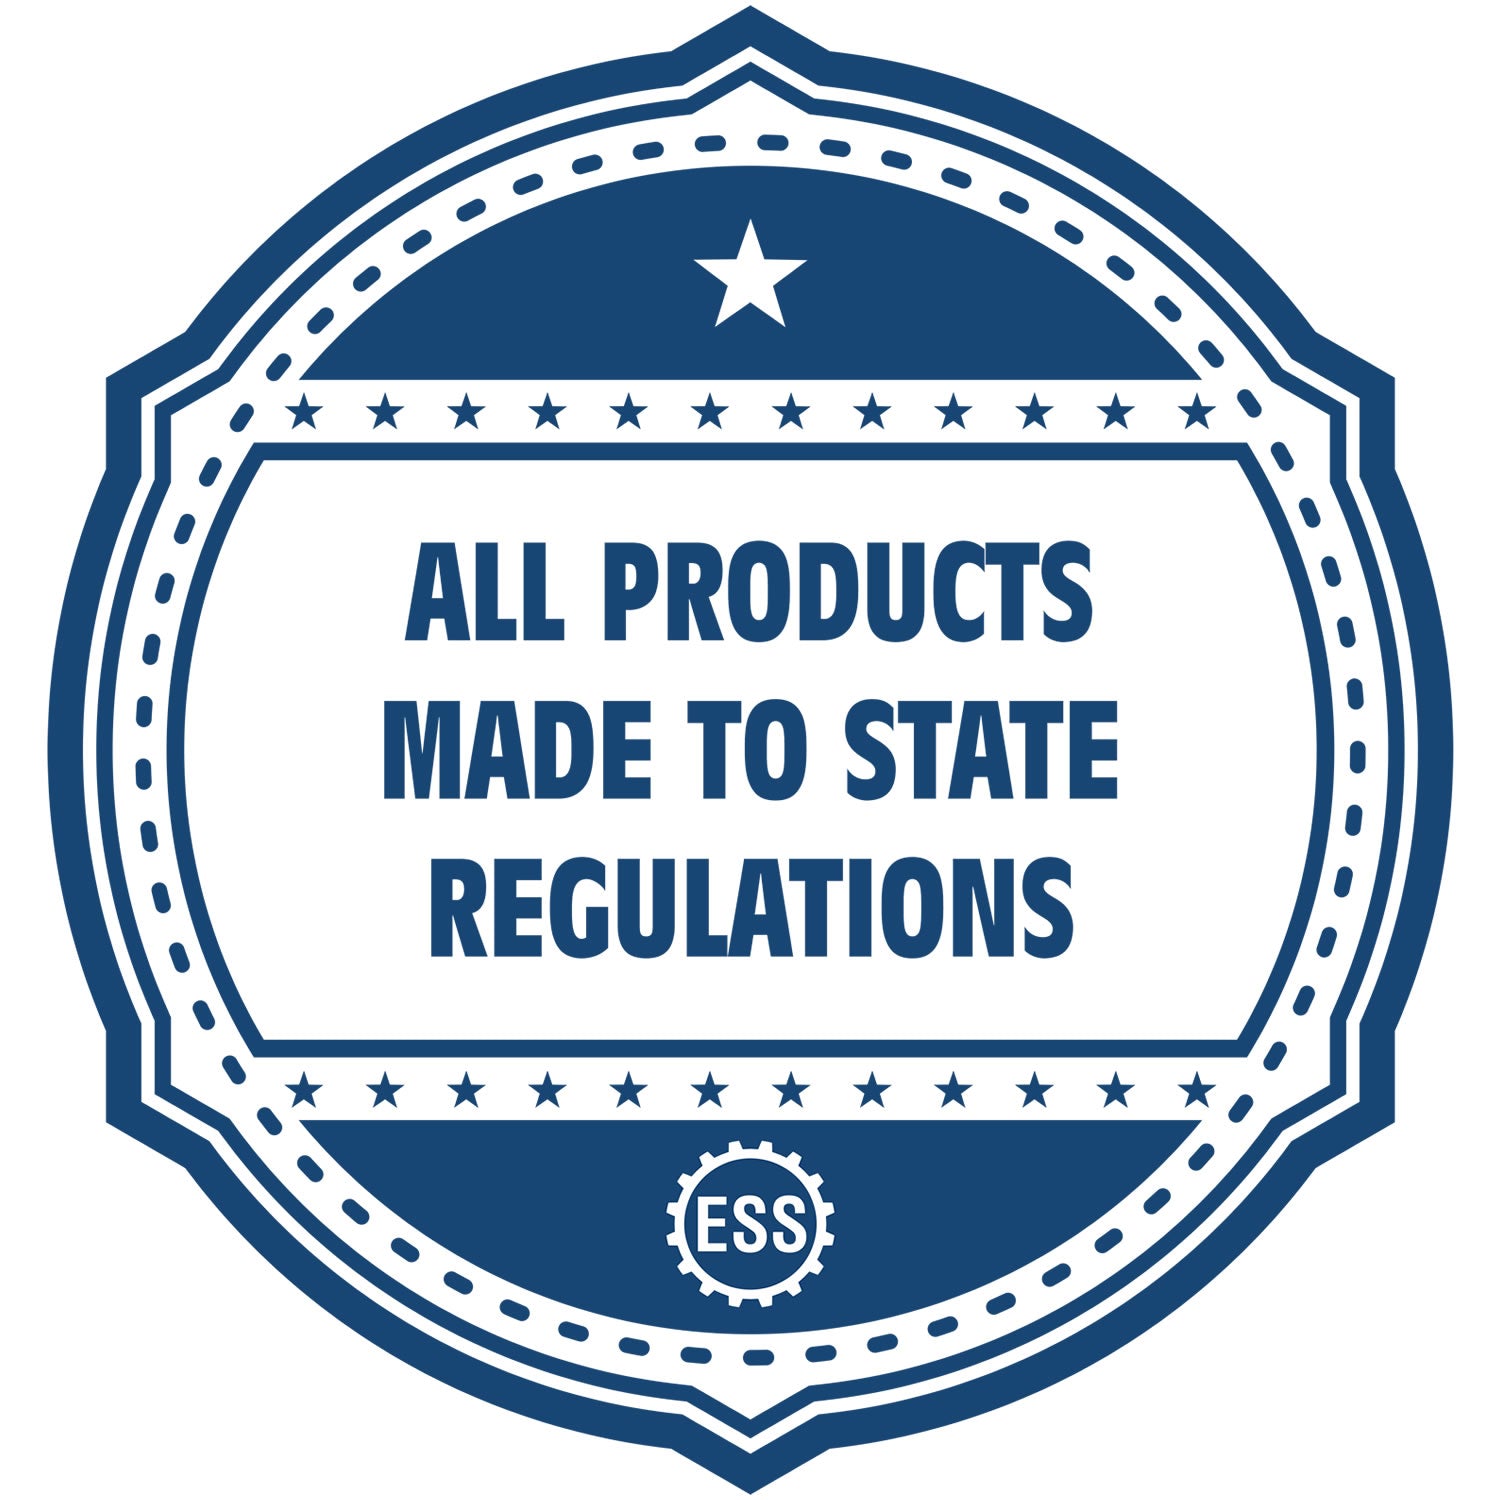 An icon or badge element for the South Dakota Professional Engineer Seal Stamp showing that this product is made in compliance with state regulations.